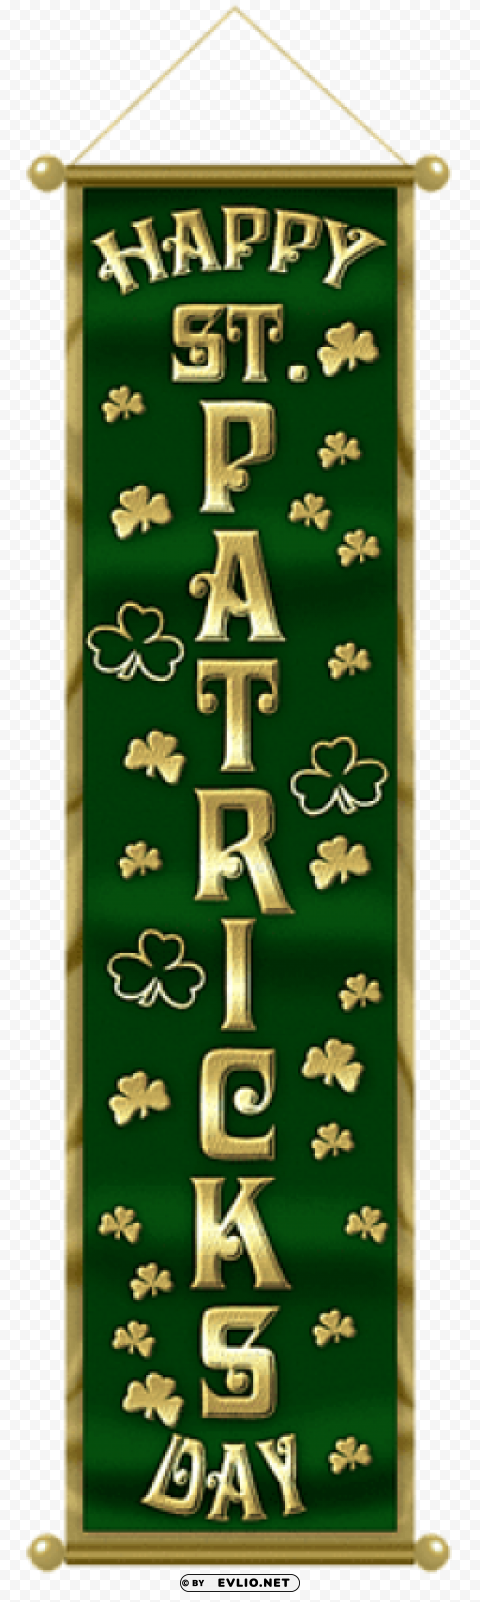  happy st patrick's day baner Free PNG images with transparent backgrounds